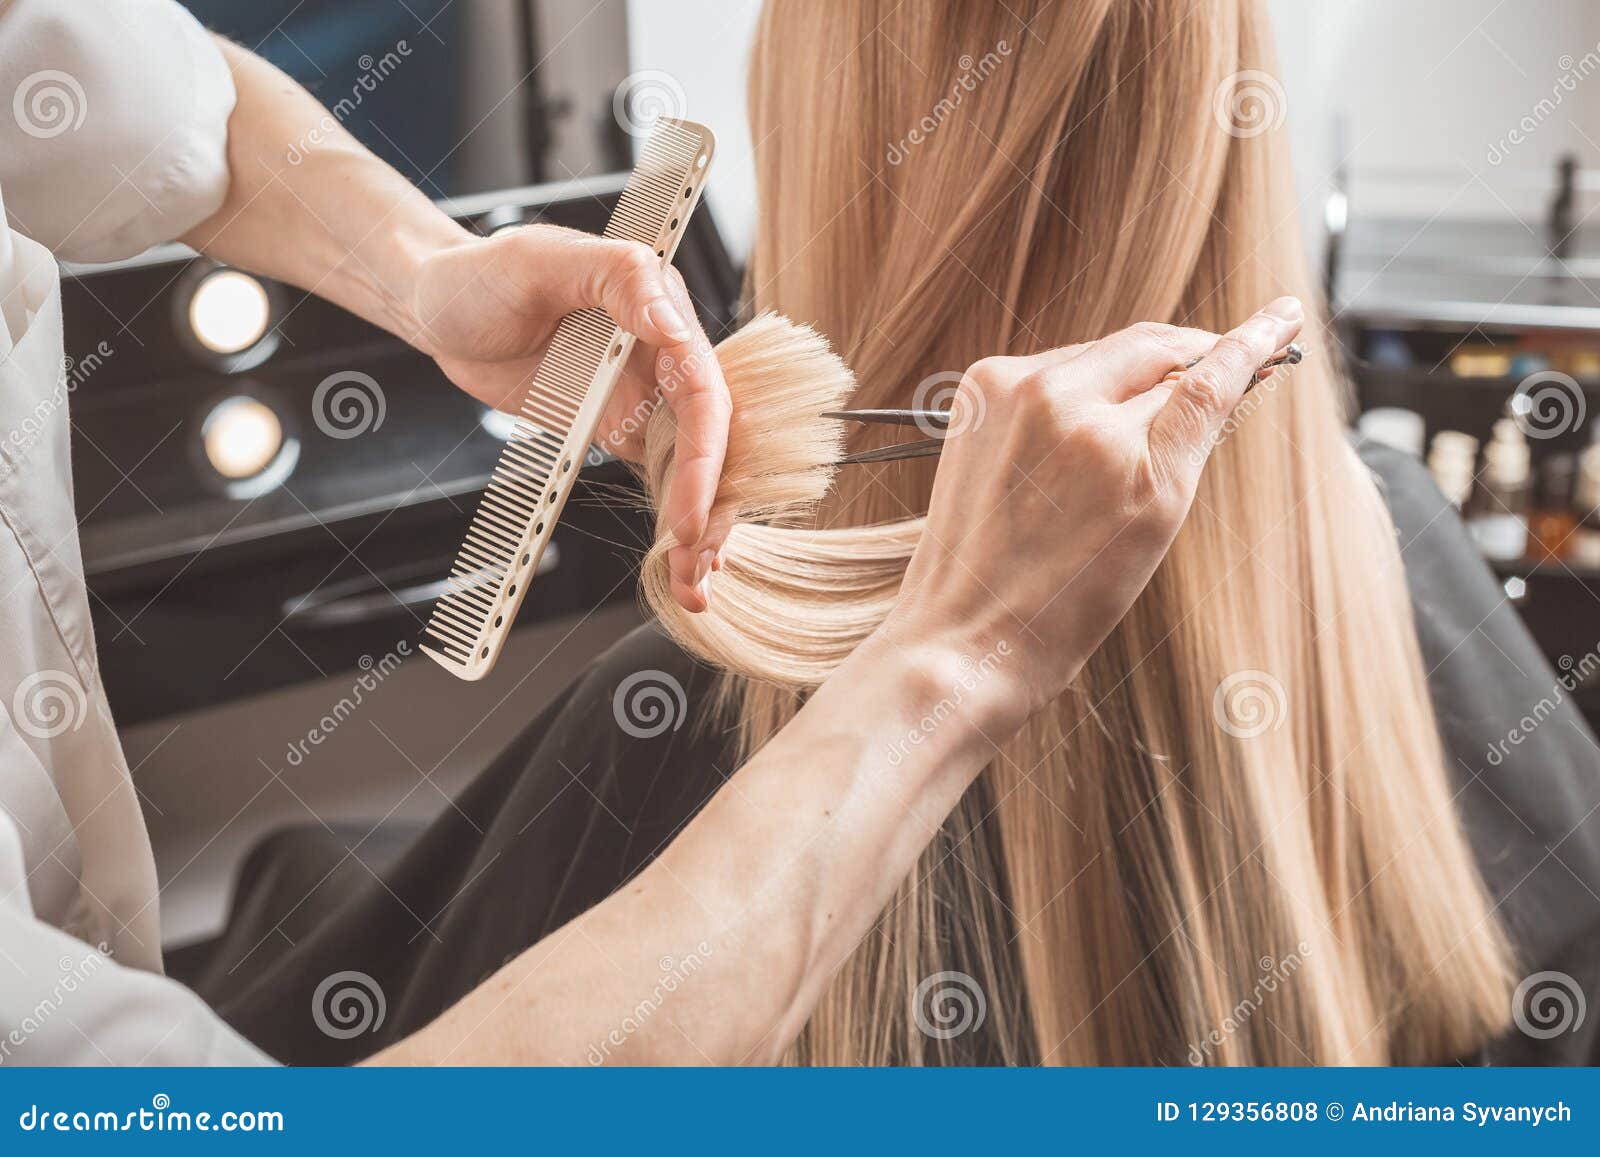 Hairdresser is Cutting Long Hair in Hair Salon Stock Photo - Image of  client, close: 129356808